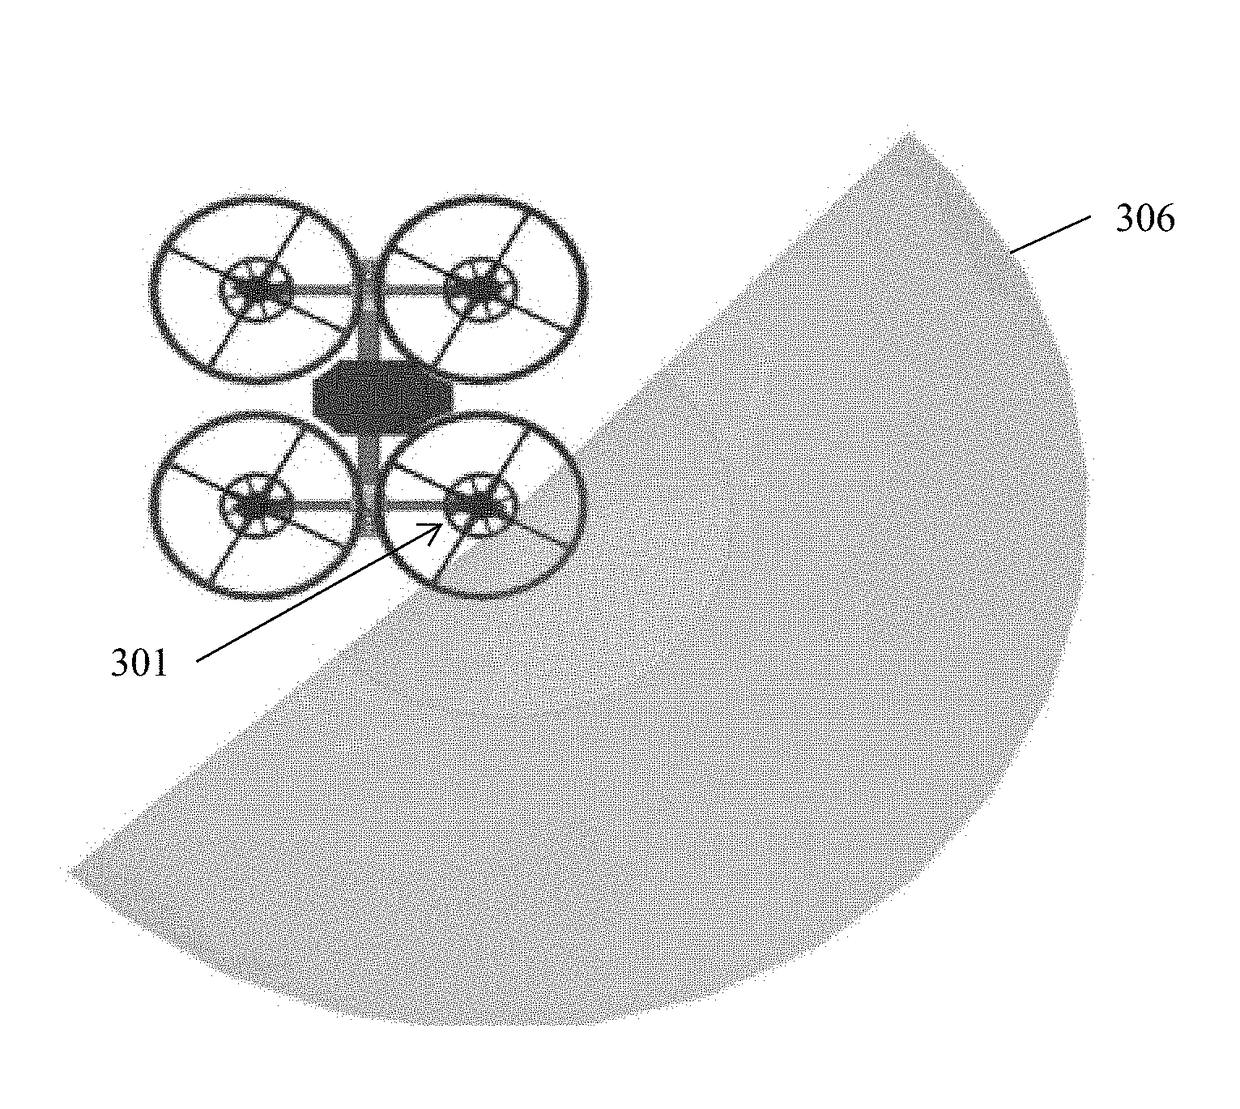 Senising on uavs for mapping and obstacle avoidance